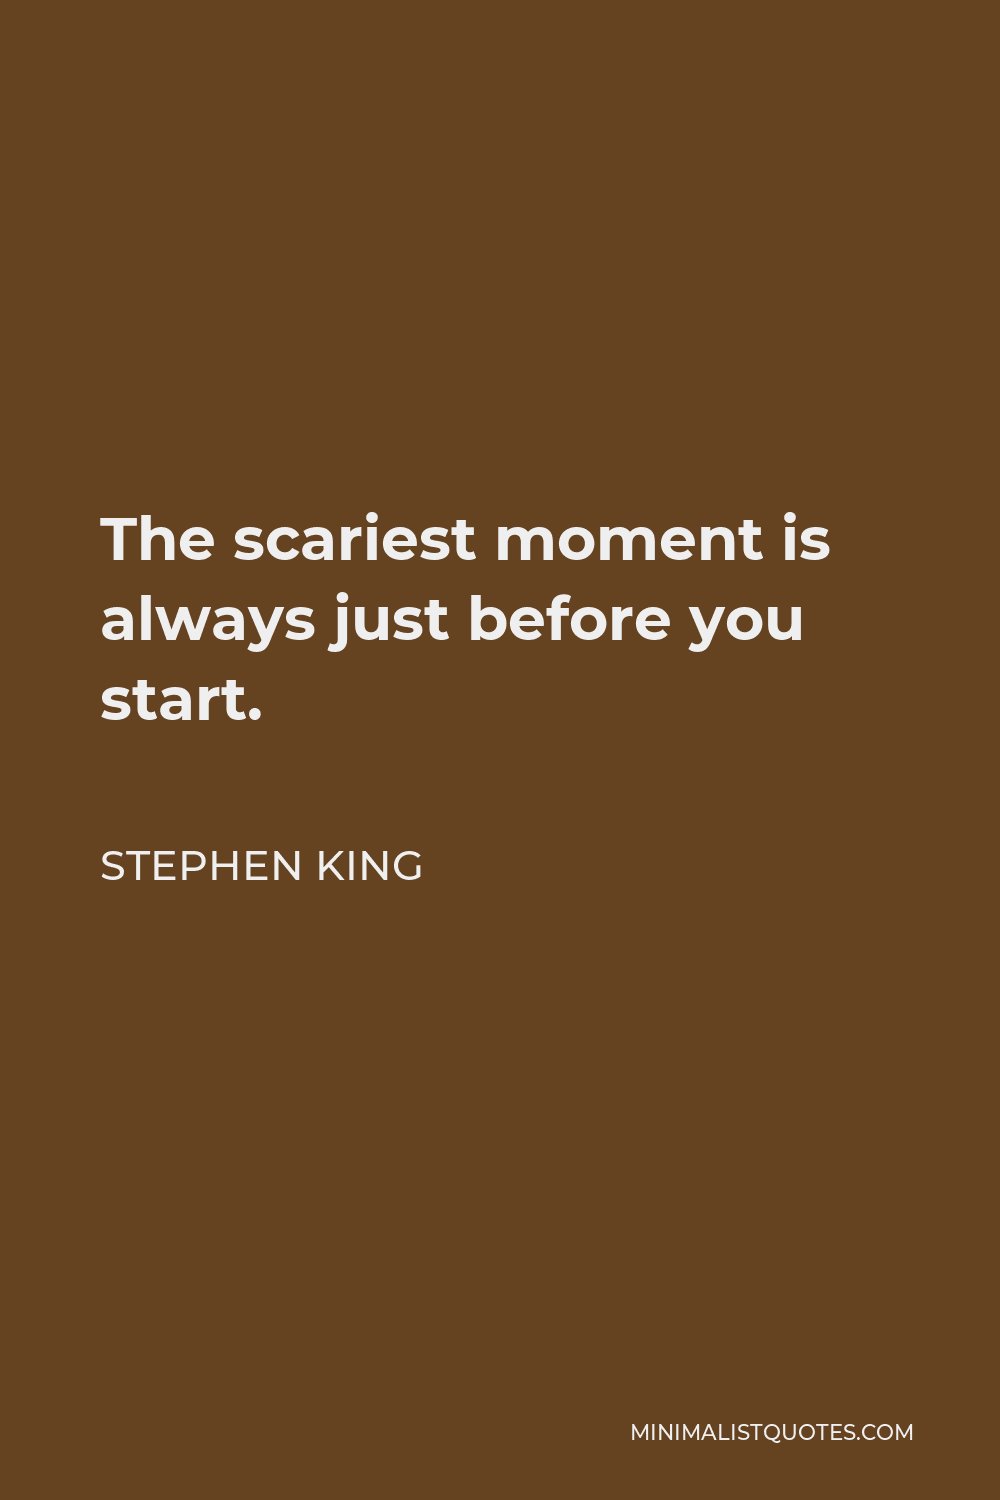 Stephen King Quote: The scariest moment is always just before you start.